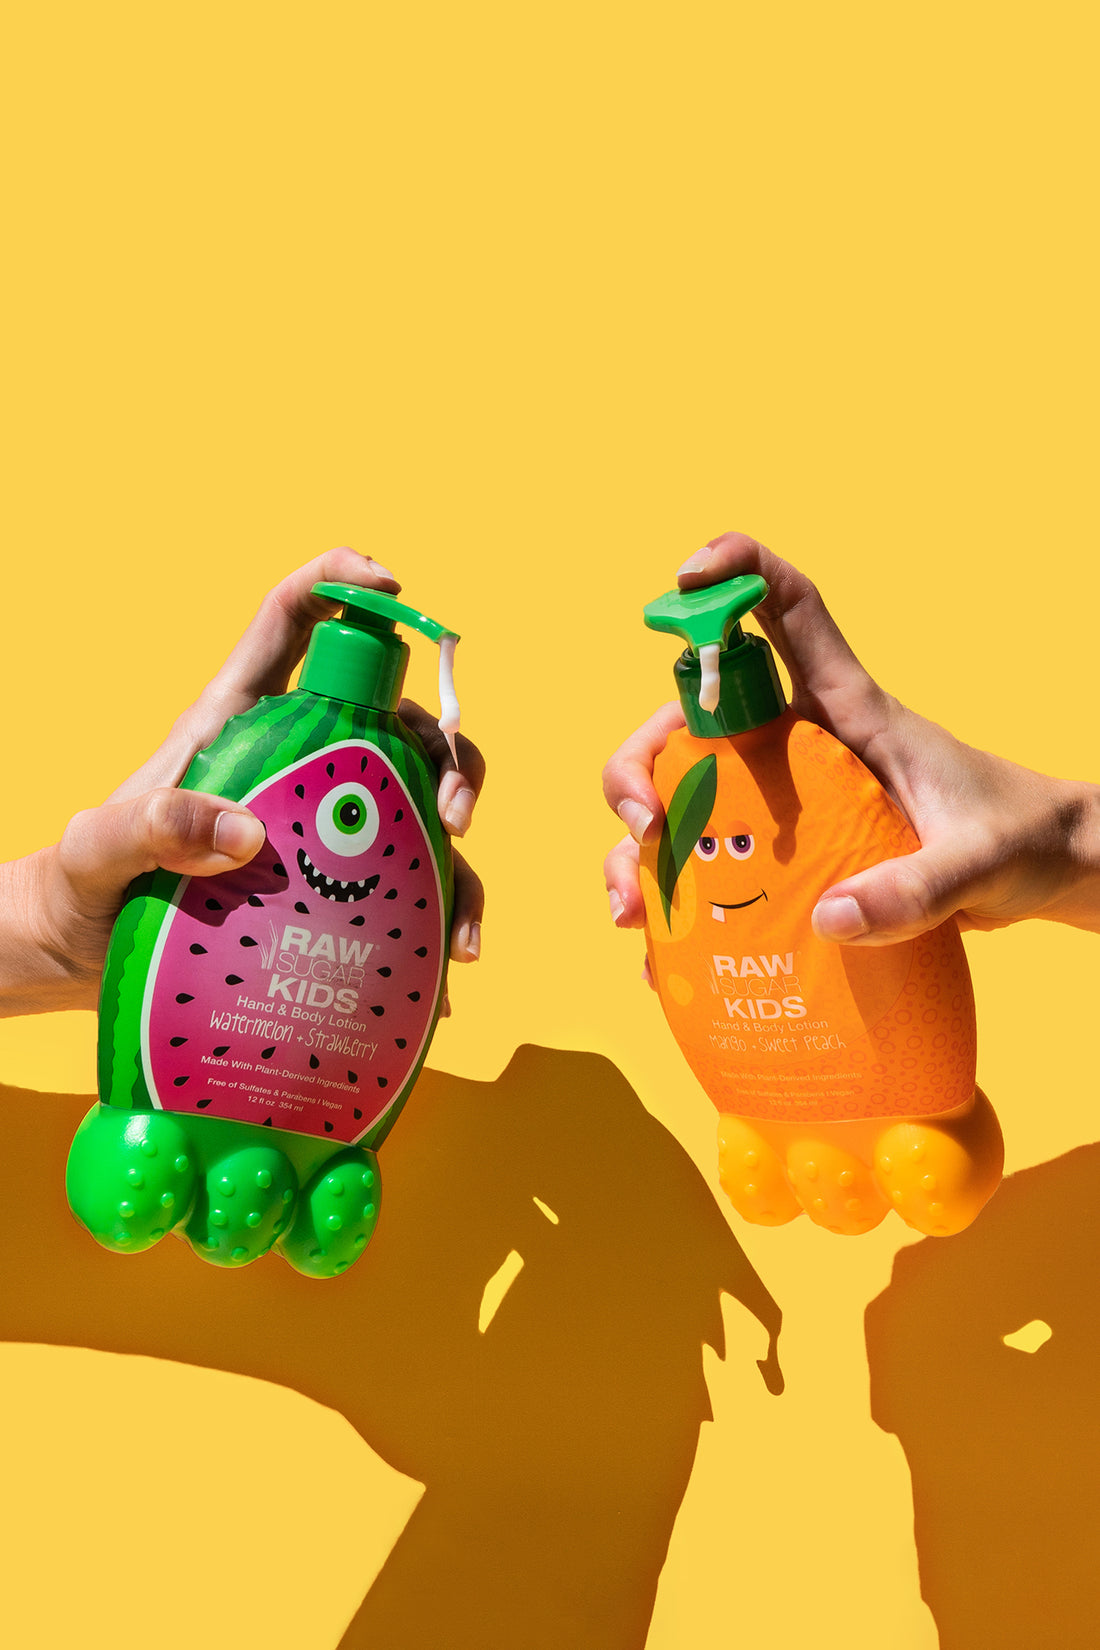 Hands Holding Kids Lotions in front of orange background